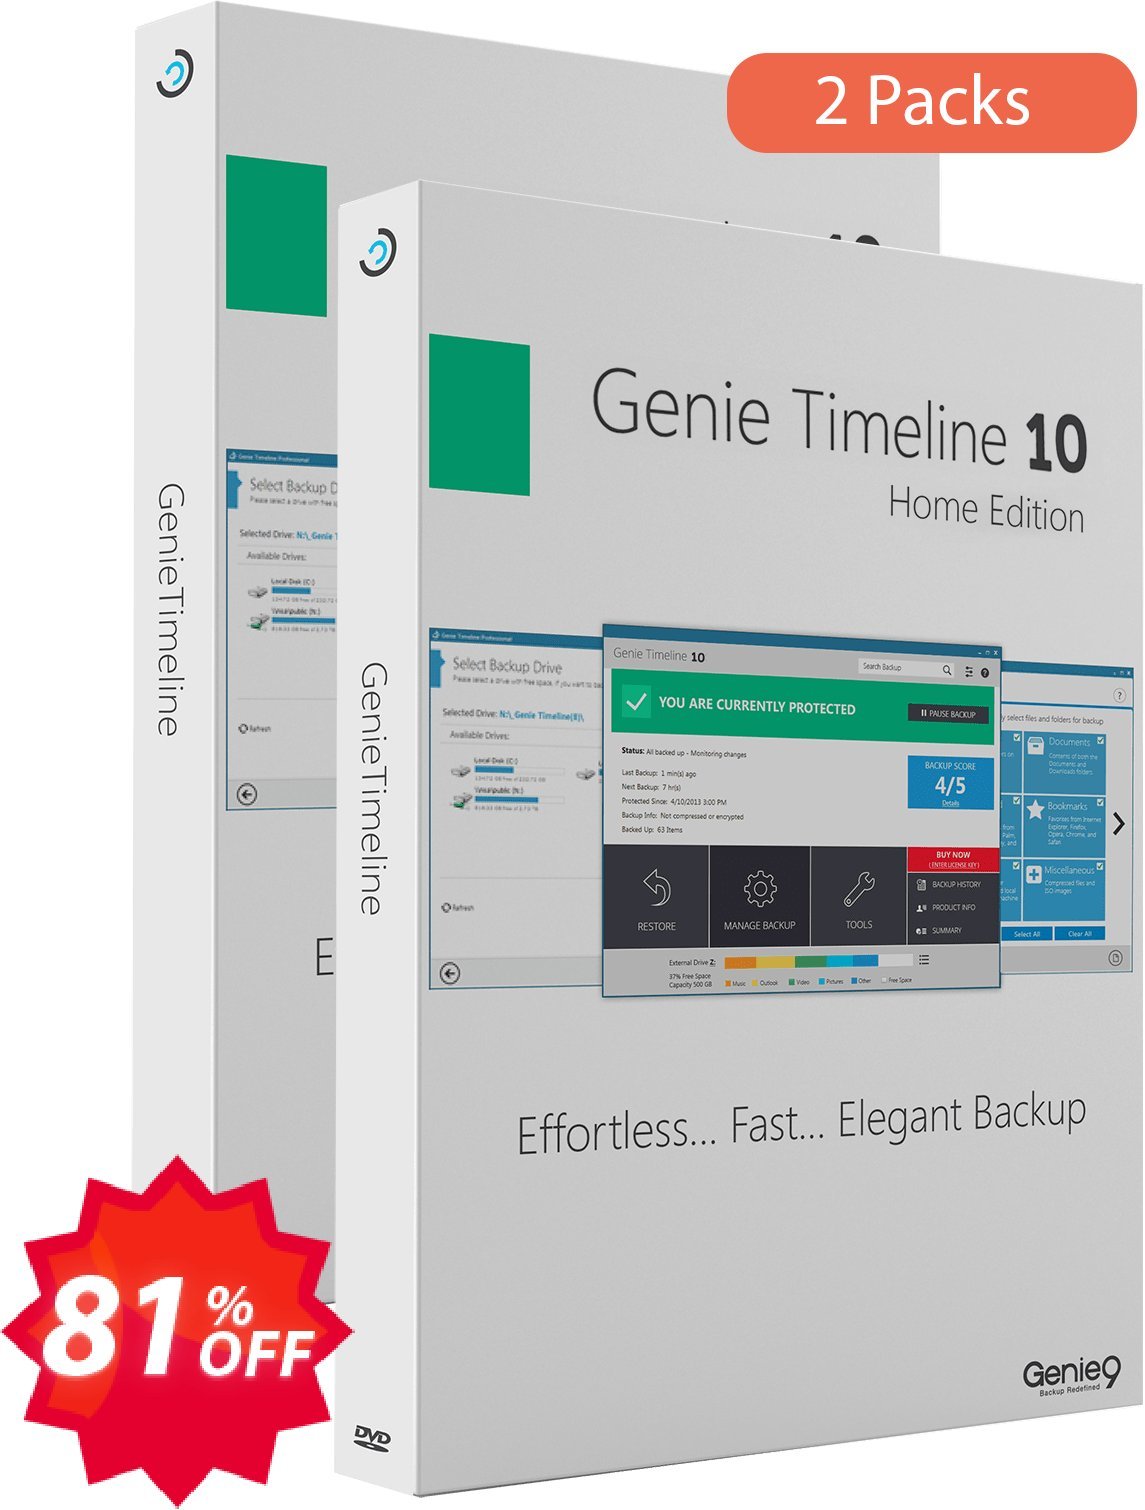 Genie Timeline Home 10, 2 Pack  Coupon code 81% discount 